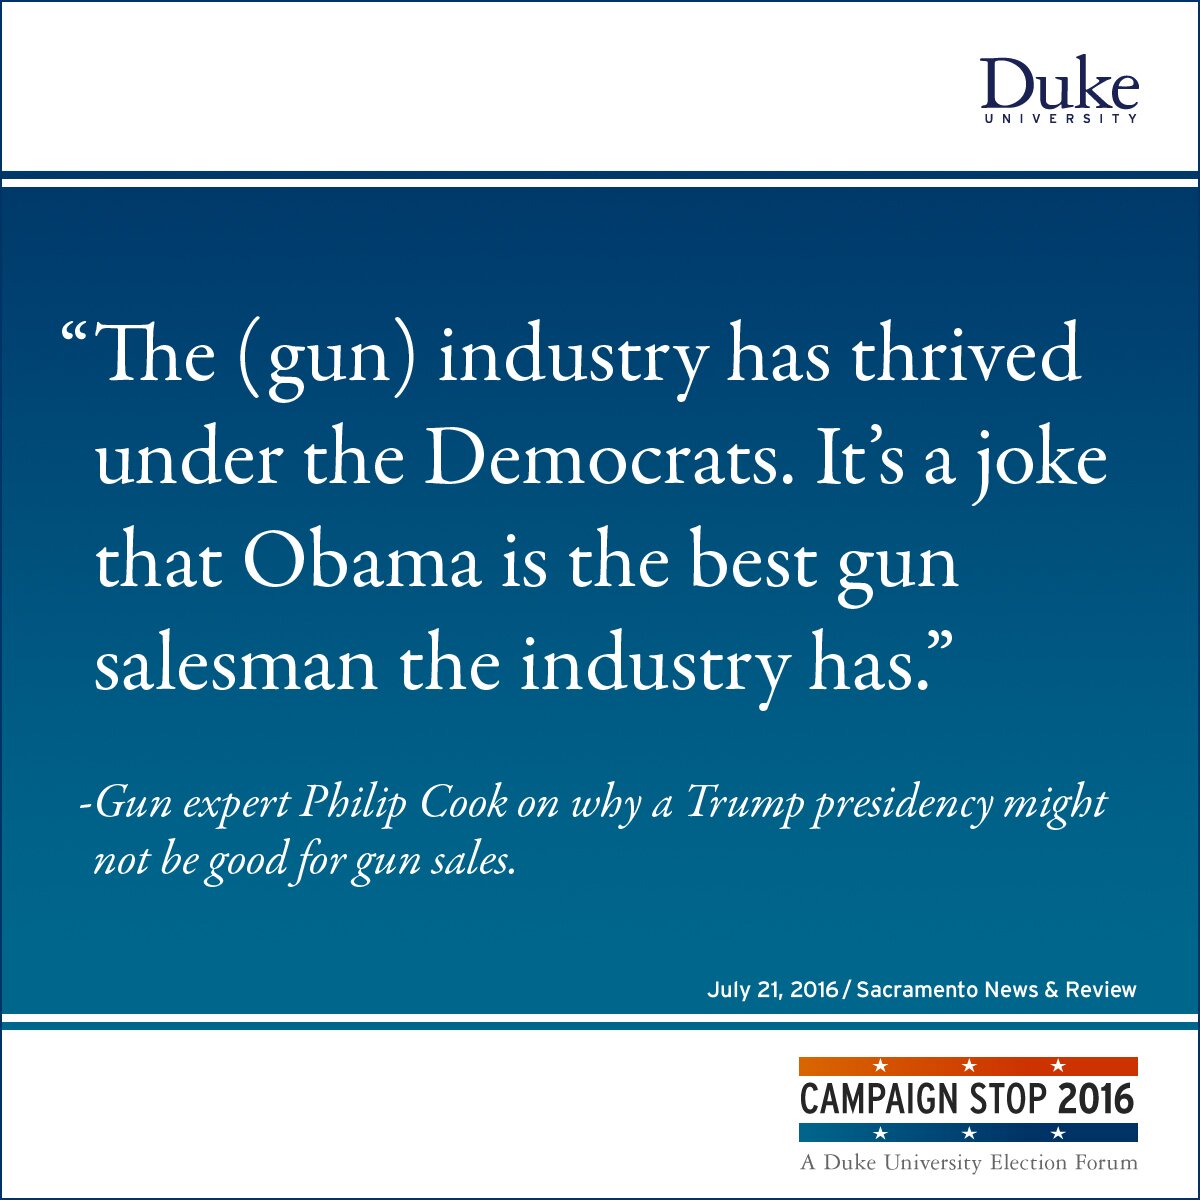 “The (gun) industry has thrived under the Democrats. It’s a joke that Obama is the best gun salesman the industry has.” -Gun expert Philip Cook on why a Trump presidency might not be good for gun sales.